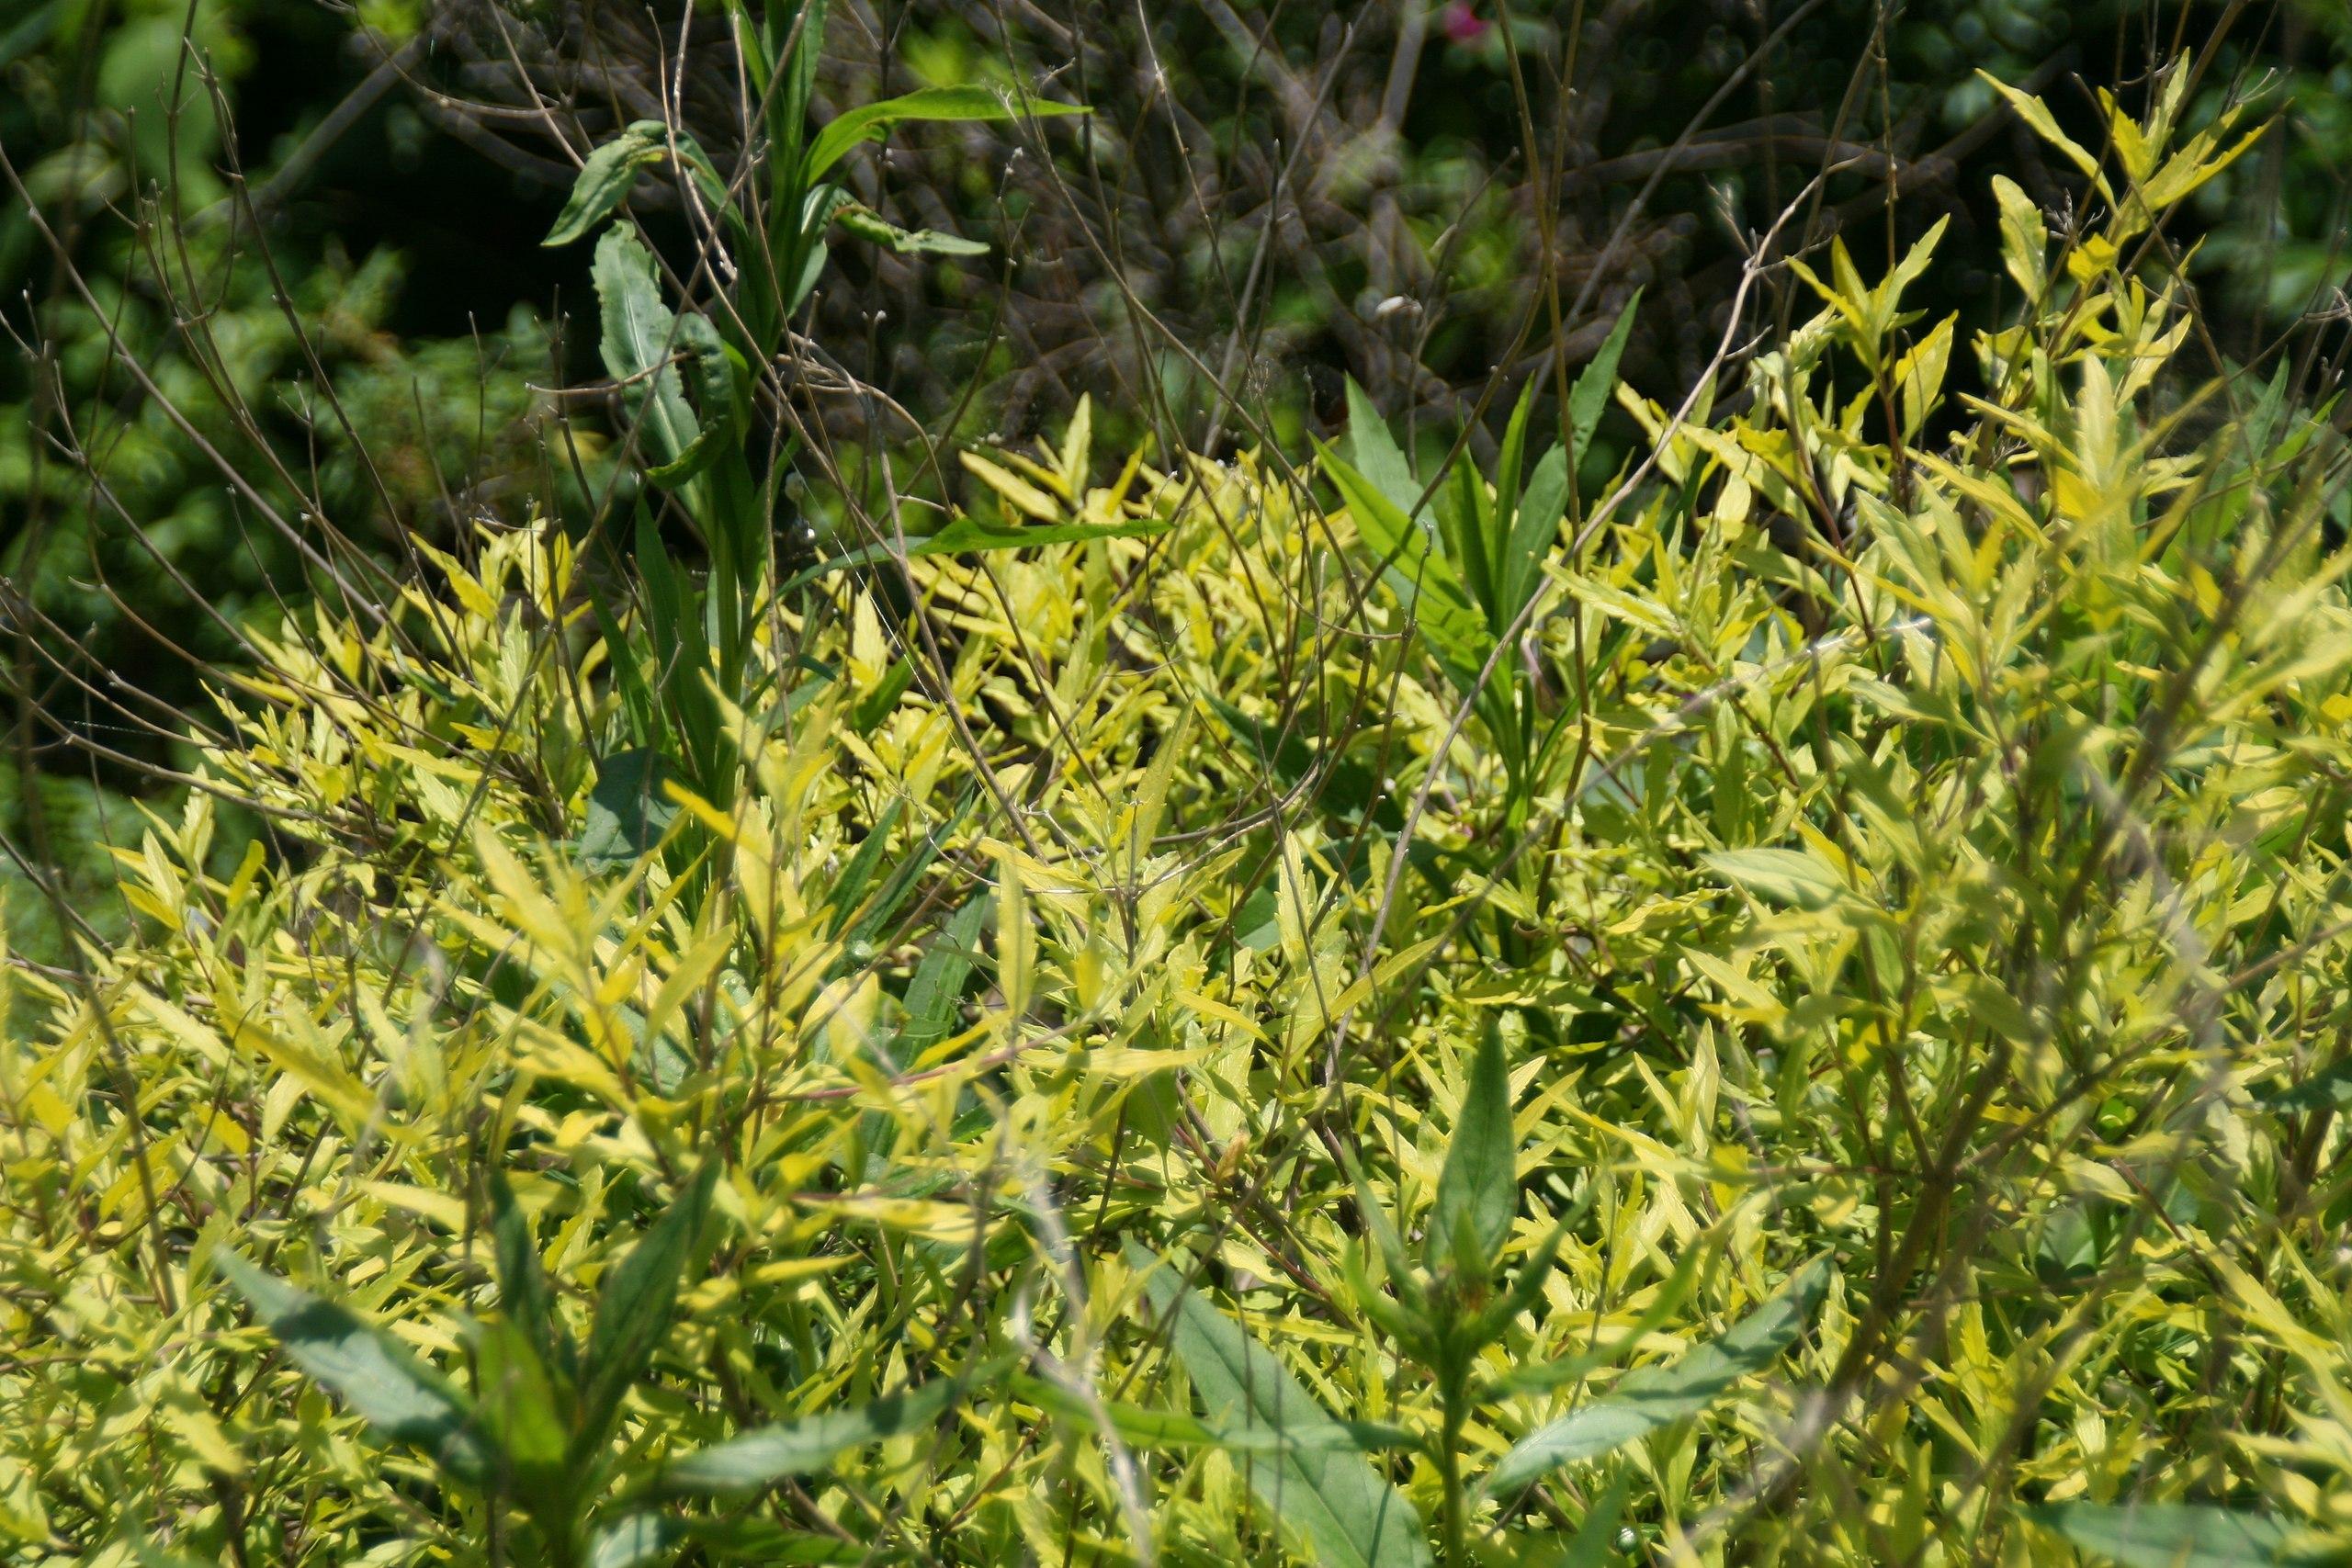 Yellow-green leaves.
